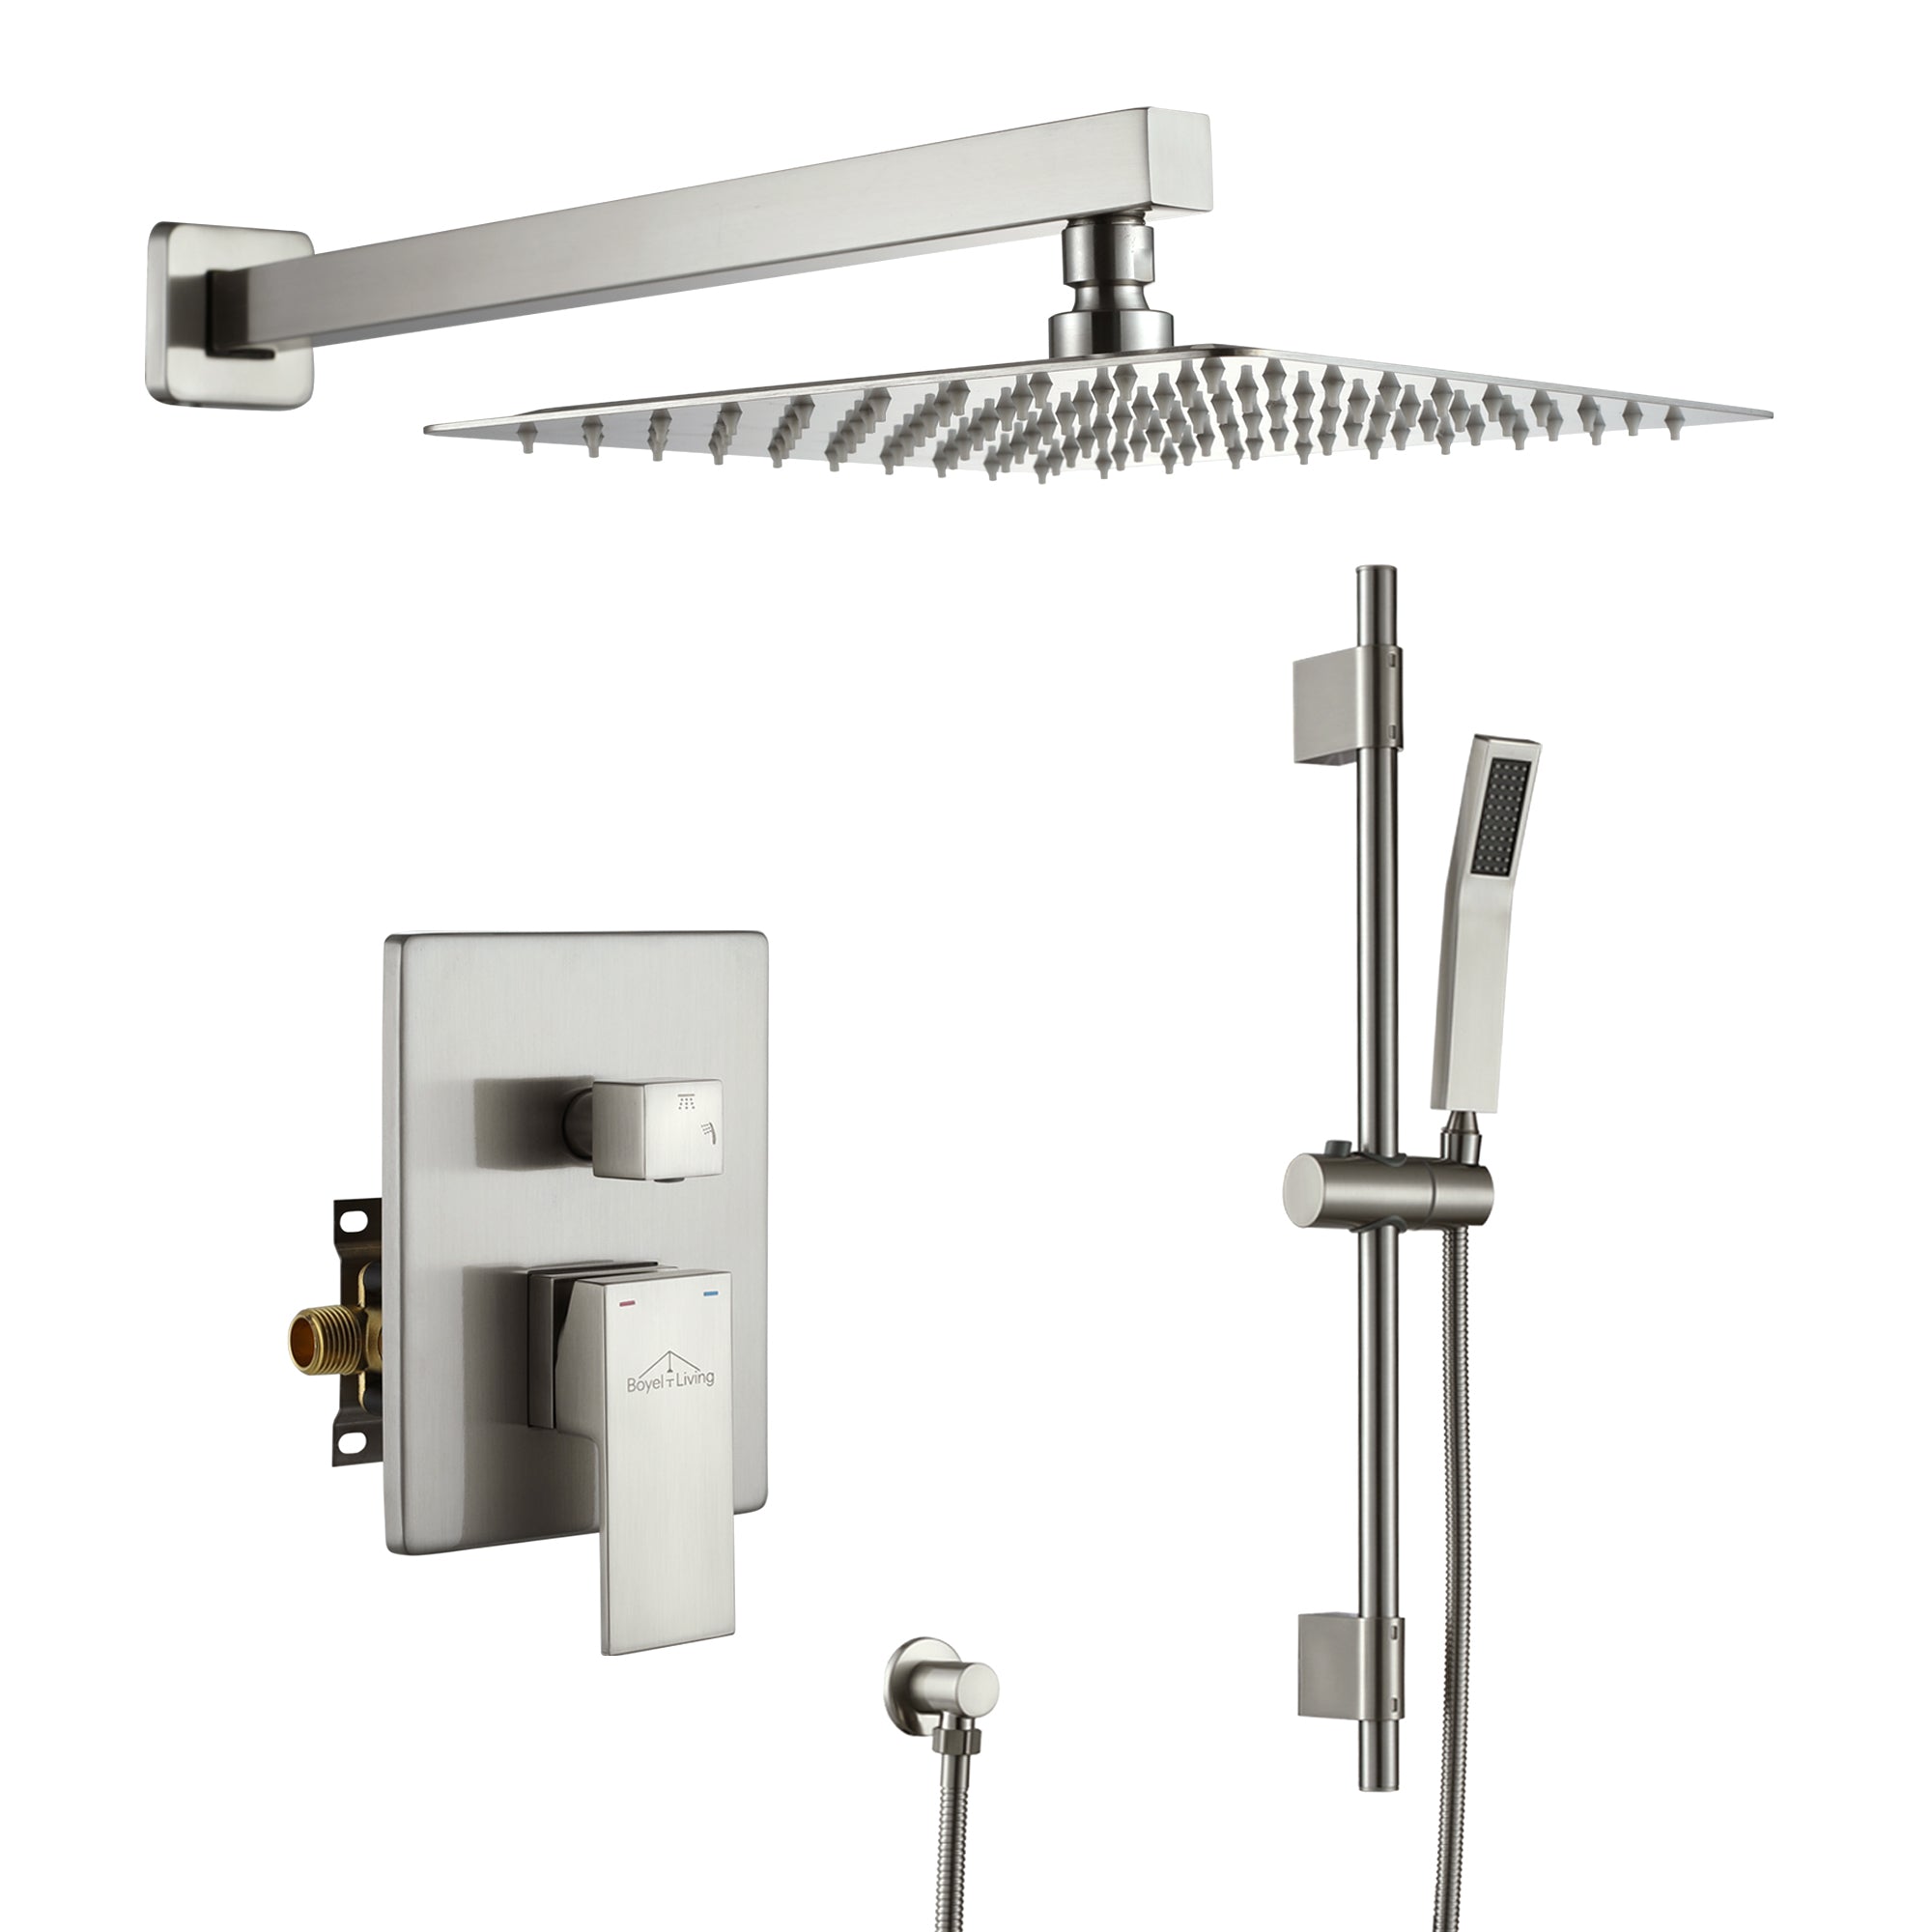 Boyel Living 2.5 GPM Wall Mount Dual Shower Heads, Shower System with Handheld in Brushed Nickel 10/12 in.-Boyel Living